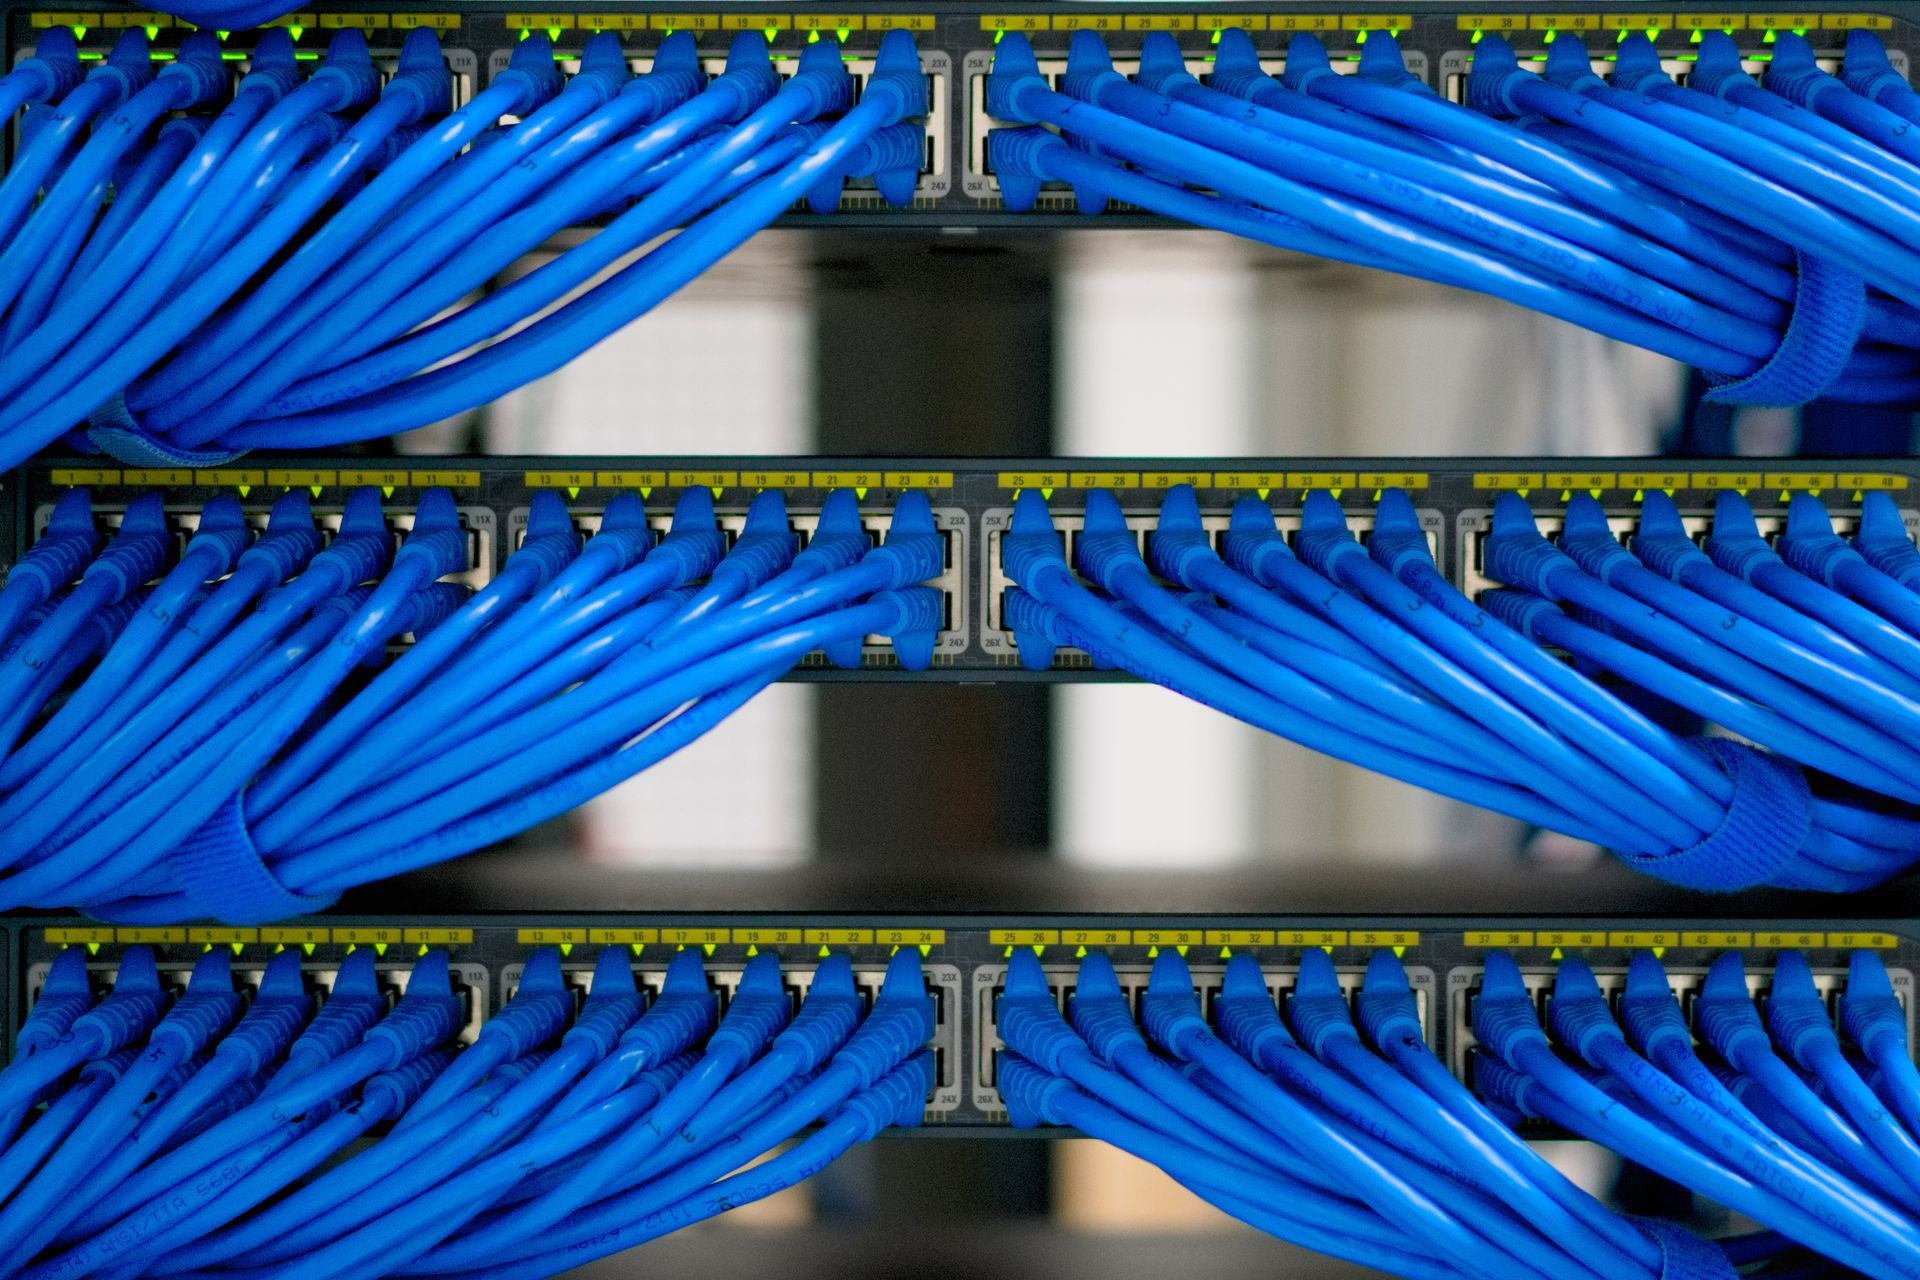 Managed array of blue Cat5e ethernet cables